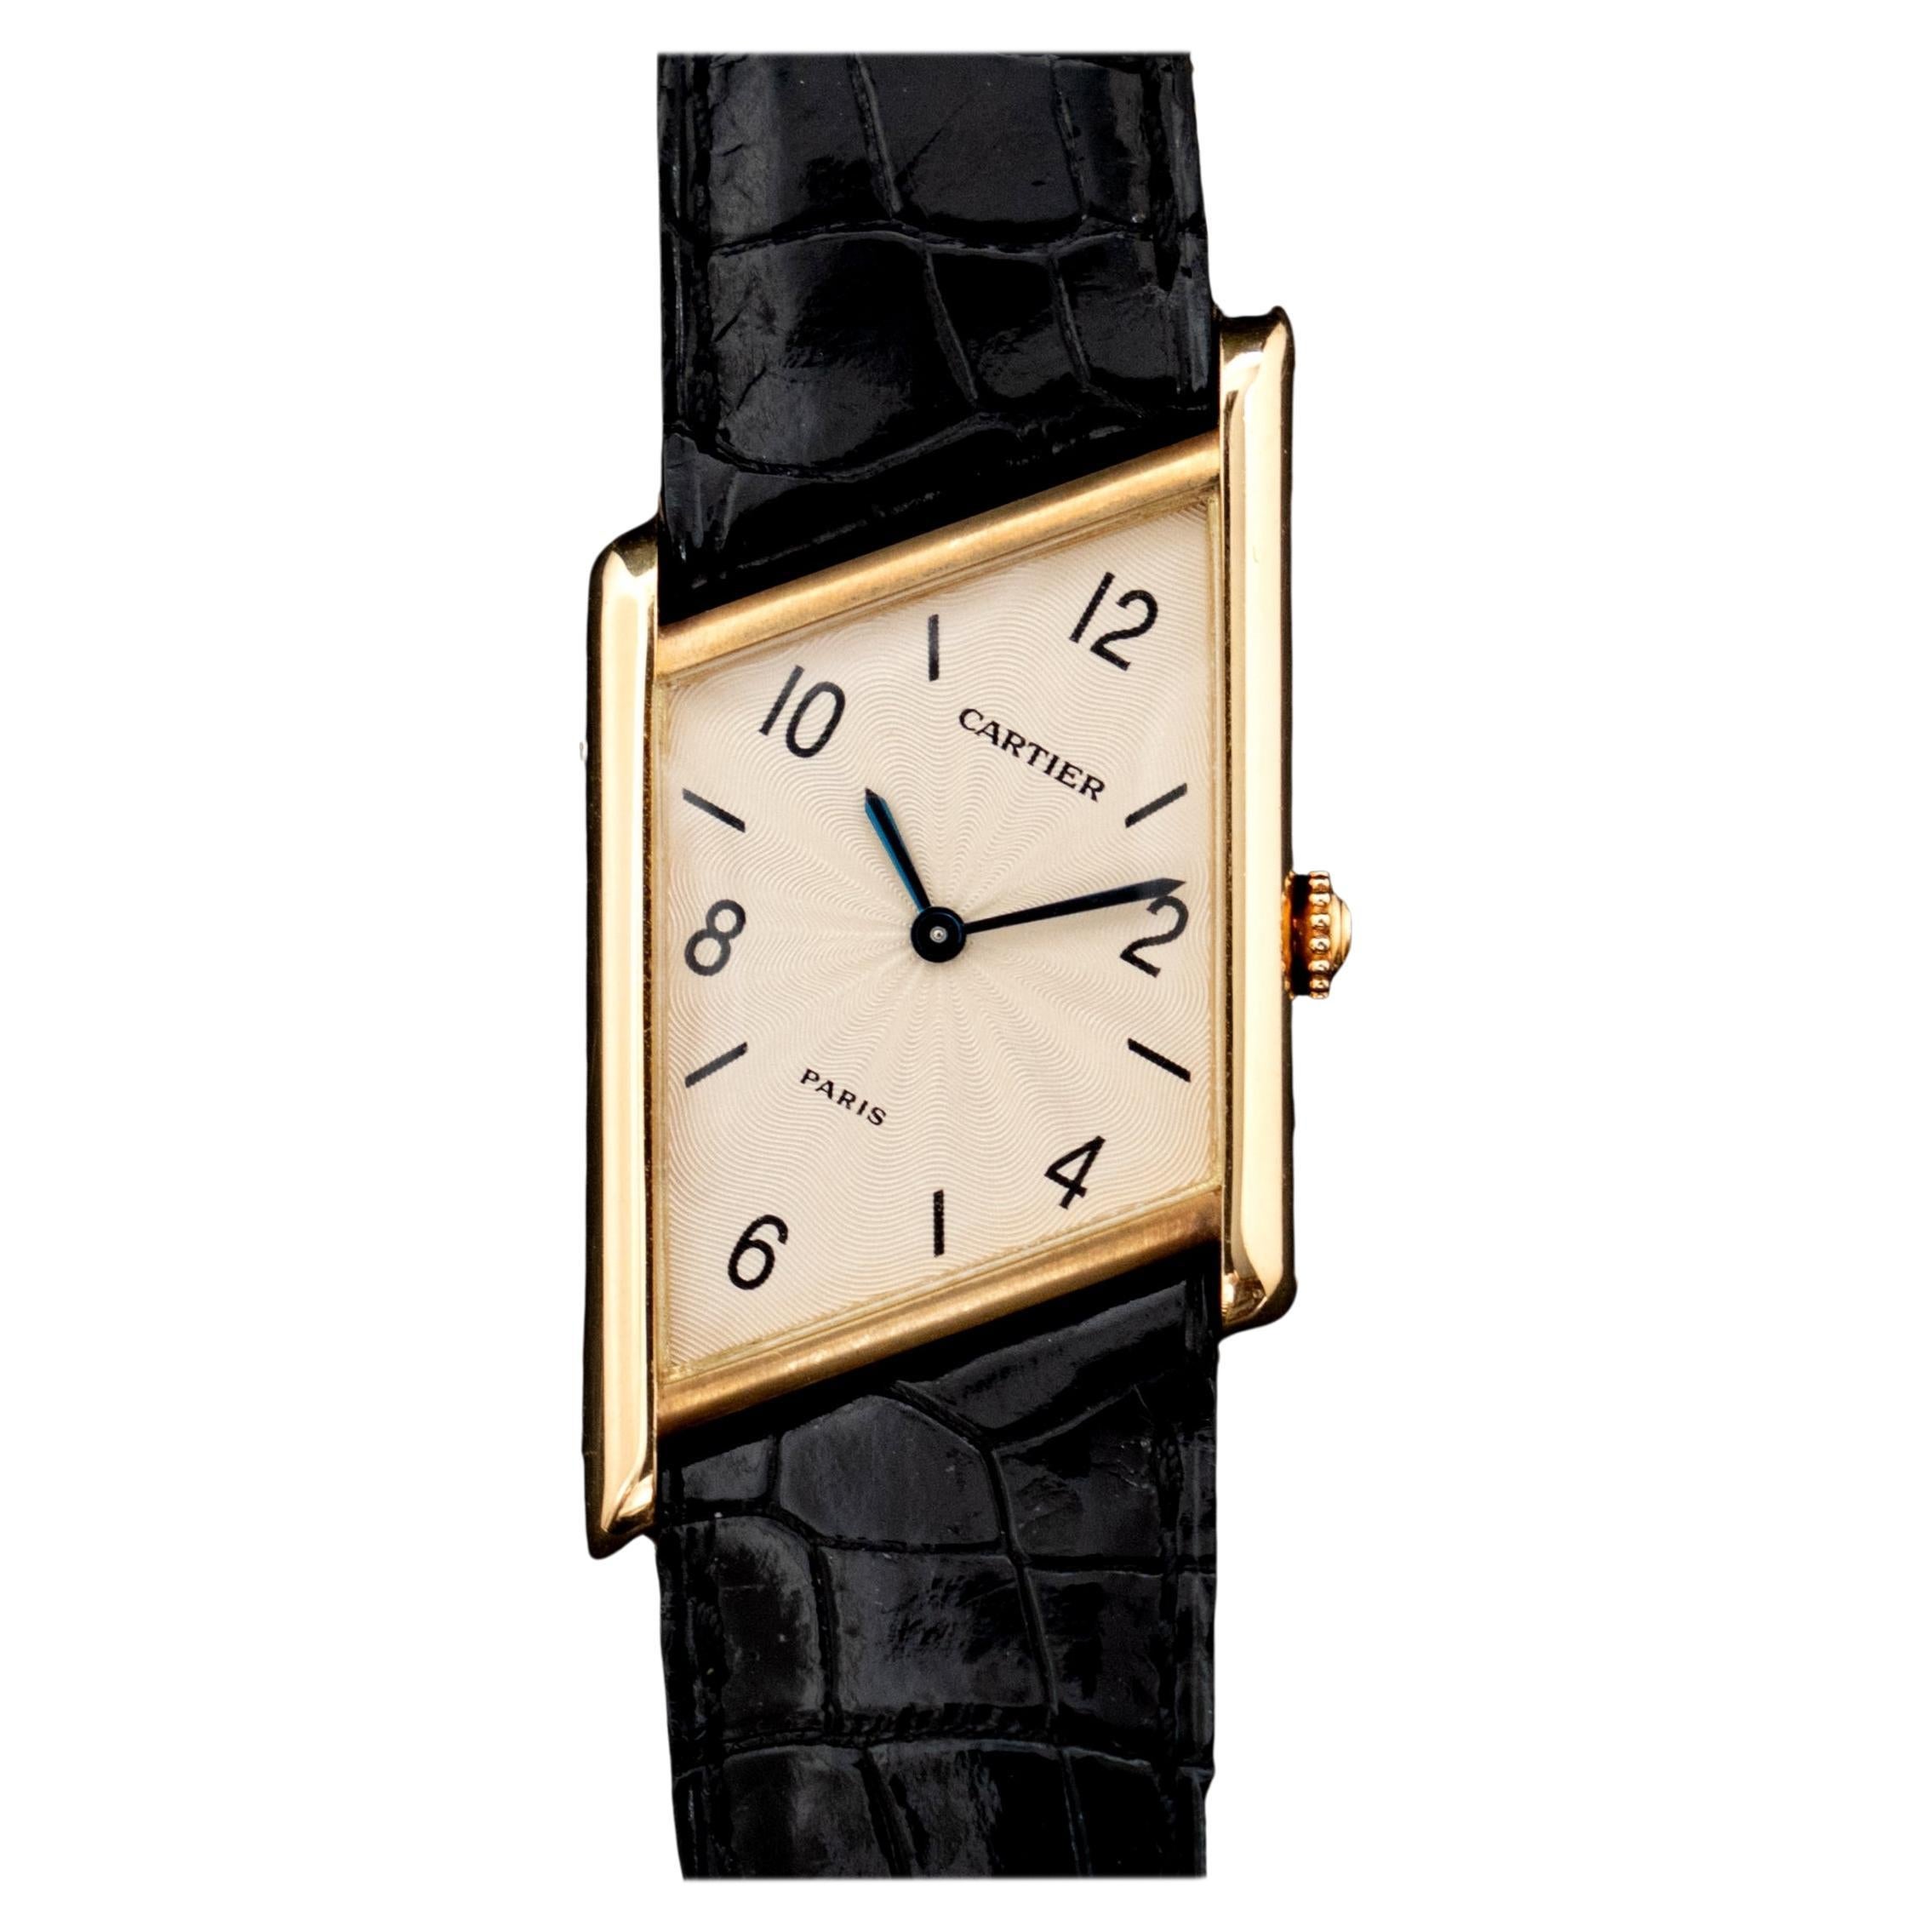 Are Cartier watches made in Paris?